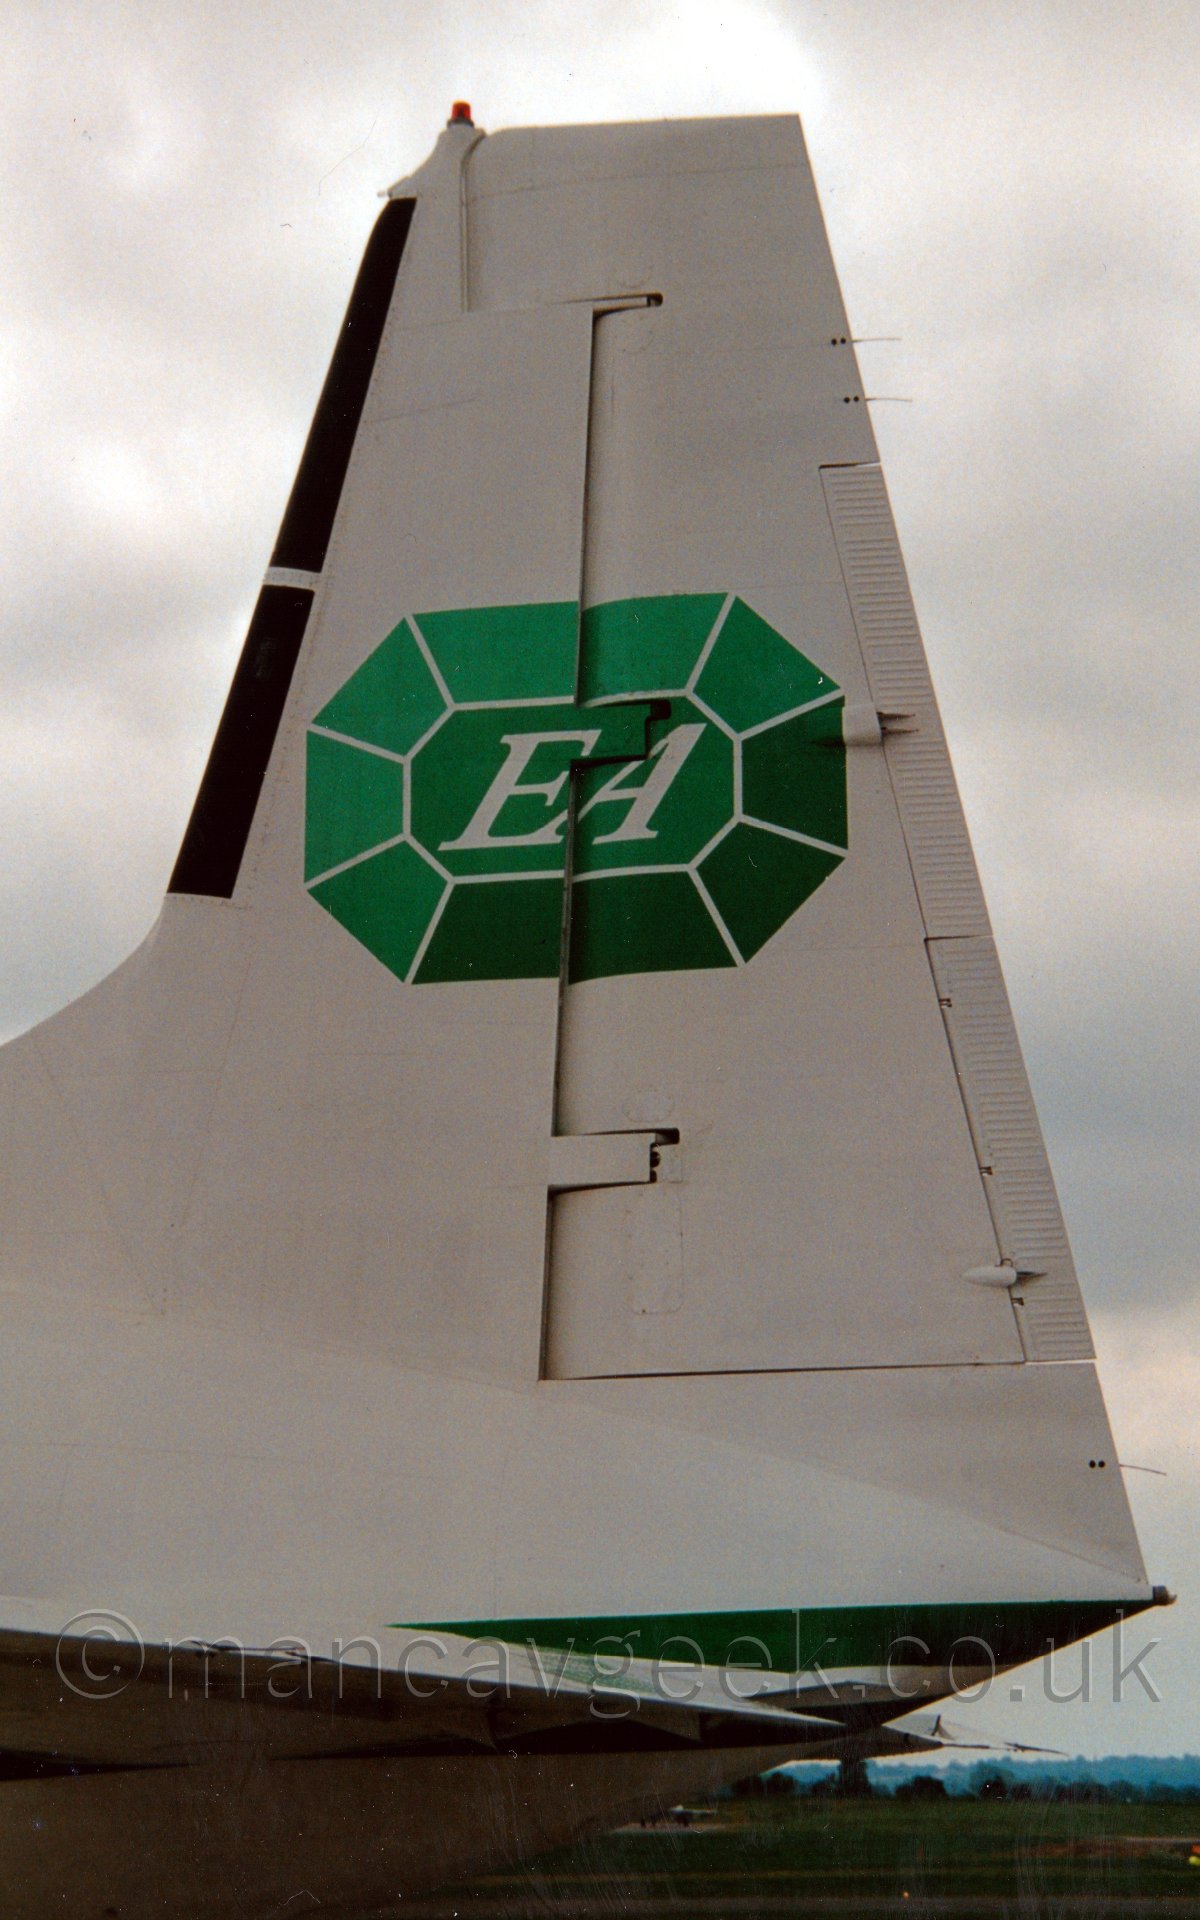 Closeup of the tail of a white, twin propellor engined airliner parked facing to the left, with an image of a green precious stone with the letters "EA" in the middle of the tail., under a grey sky.